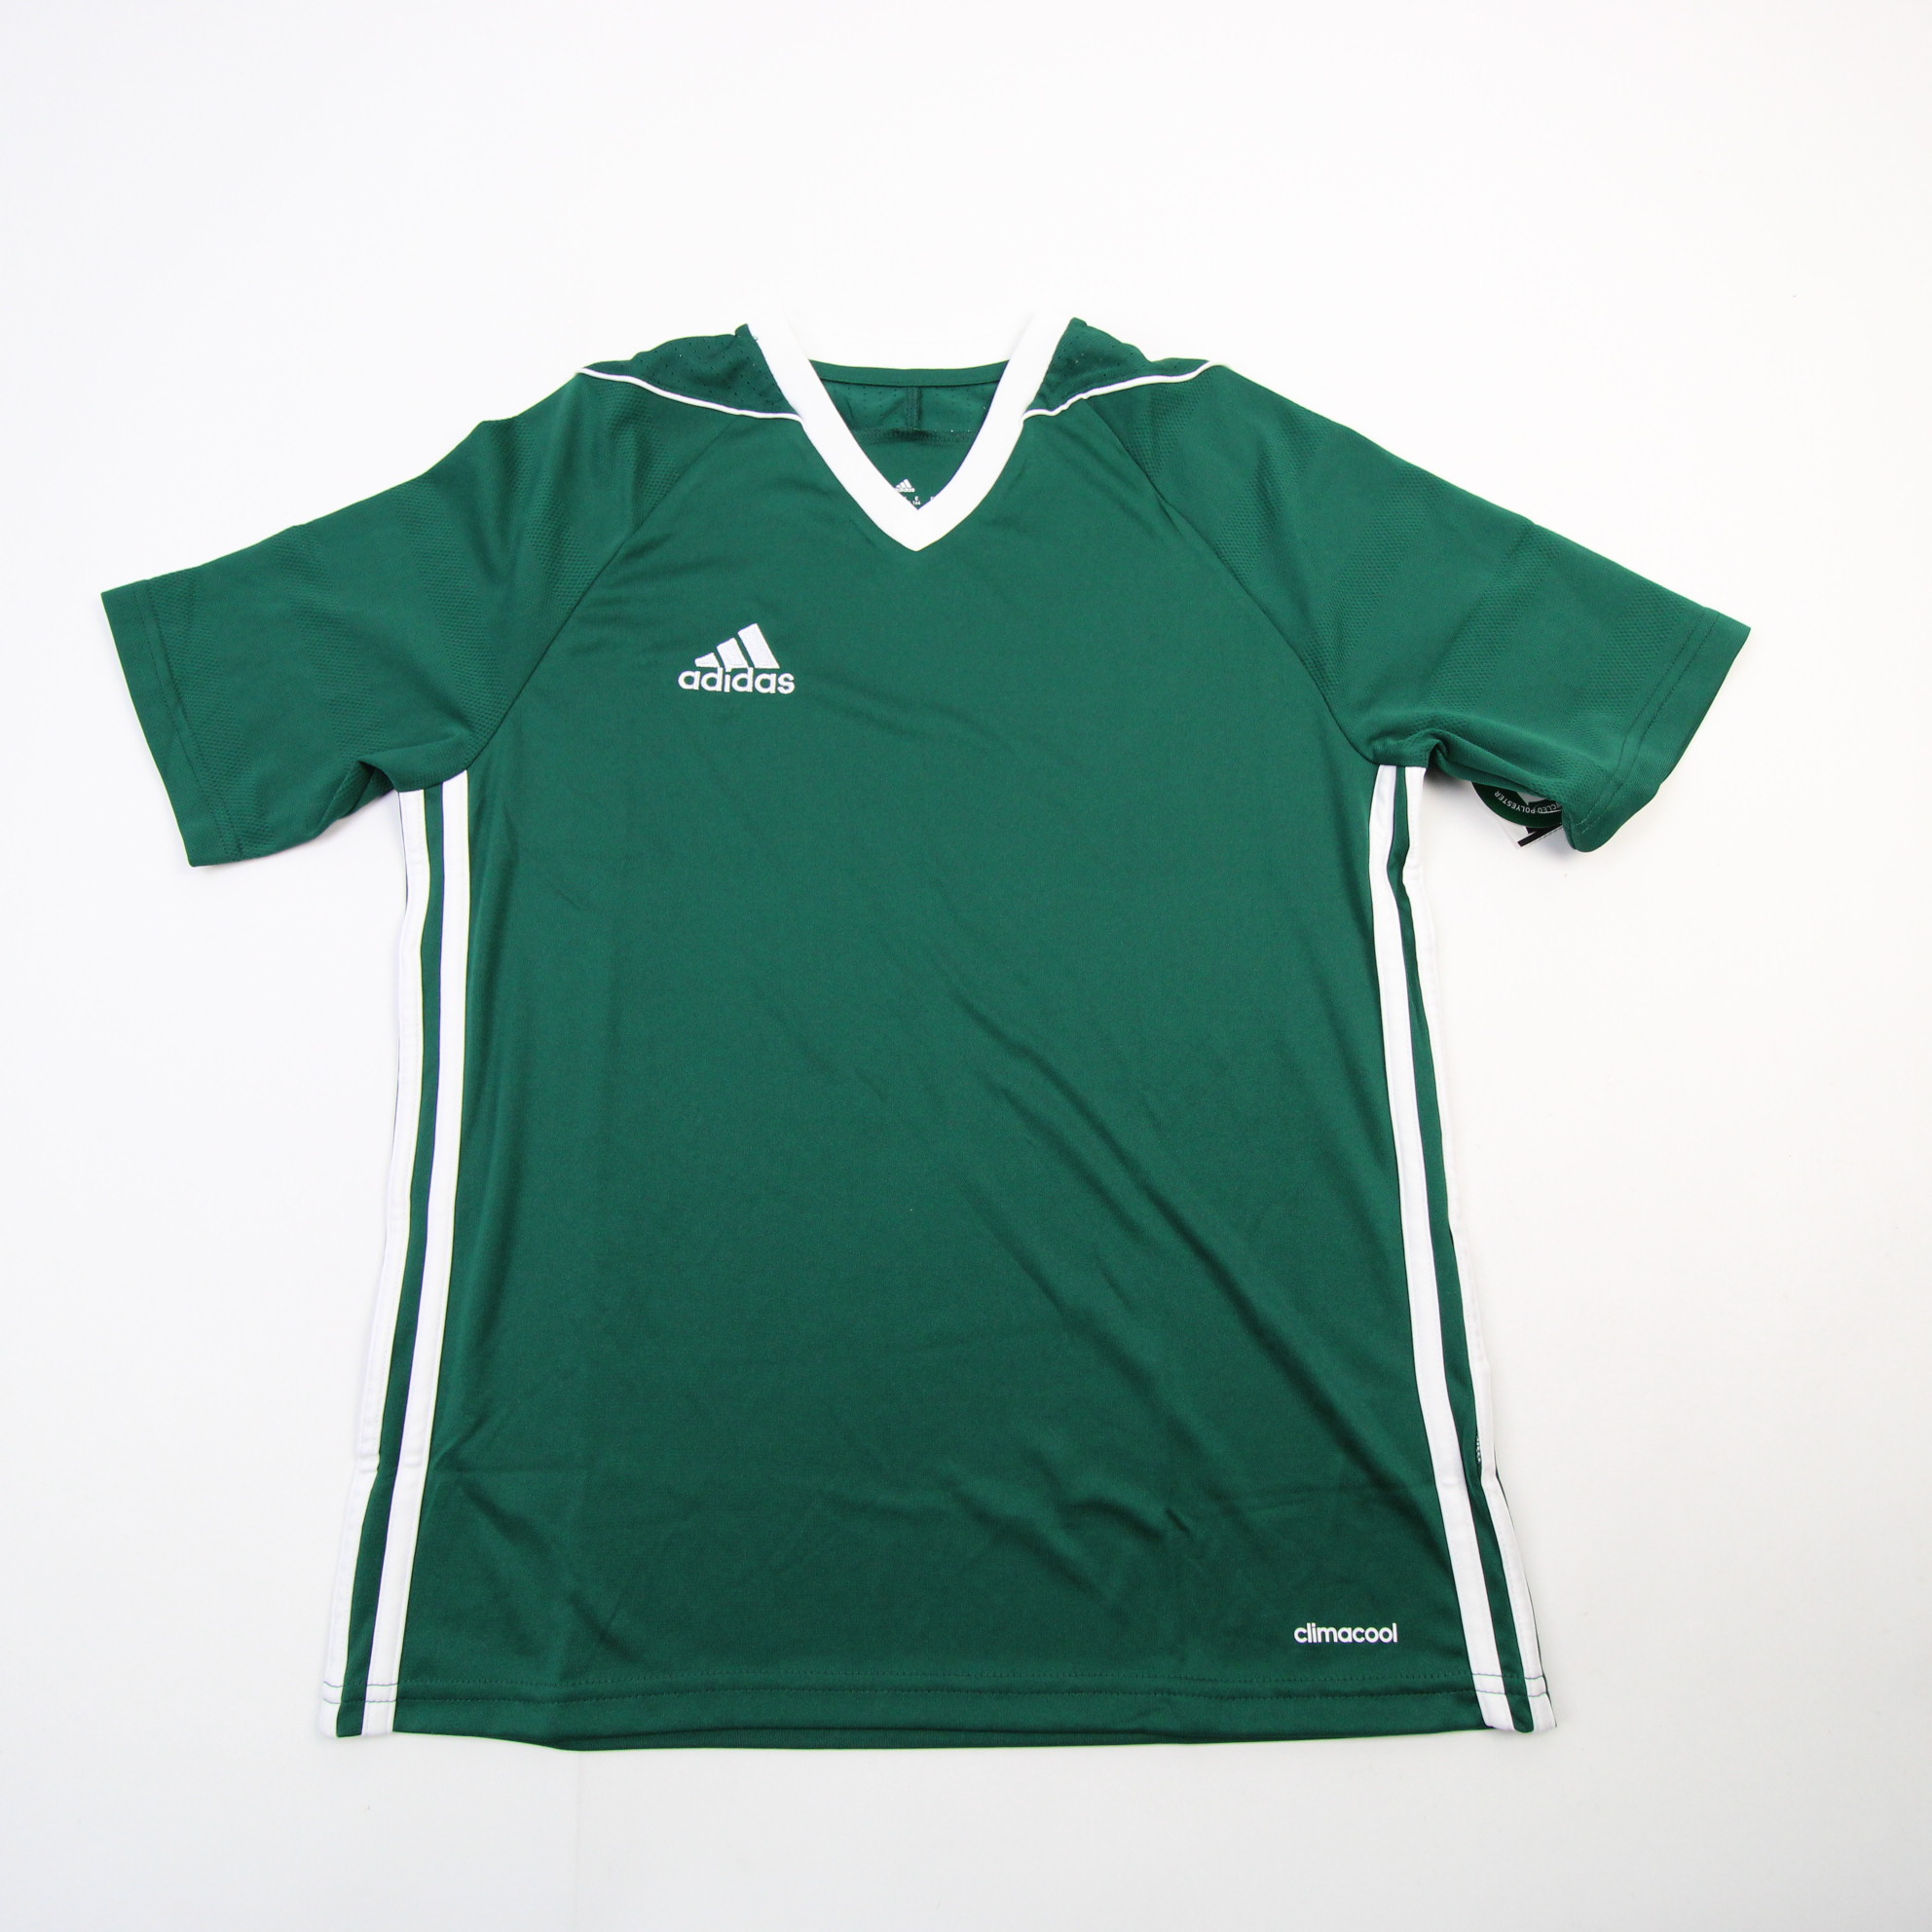 Infectious disease Apartment rookie adidas Climacool Practice Jersey - Soccer Youth Dark Green/White New with  Tags | eBay